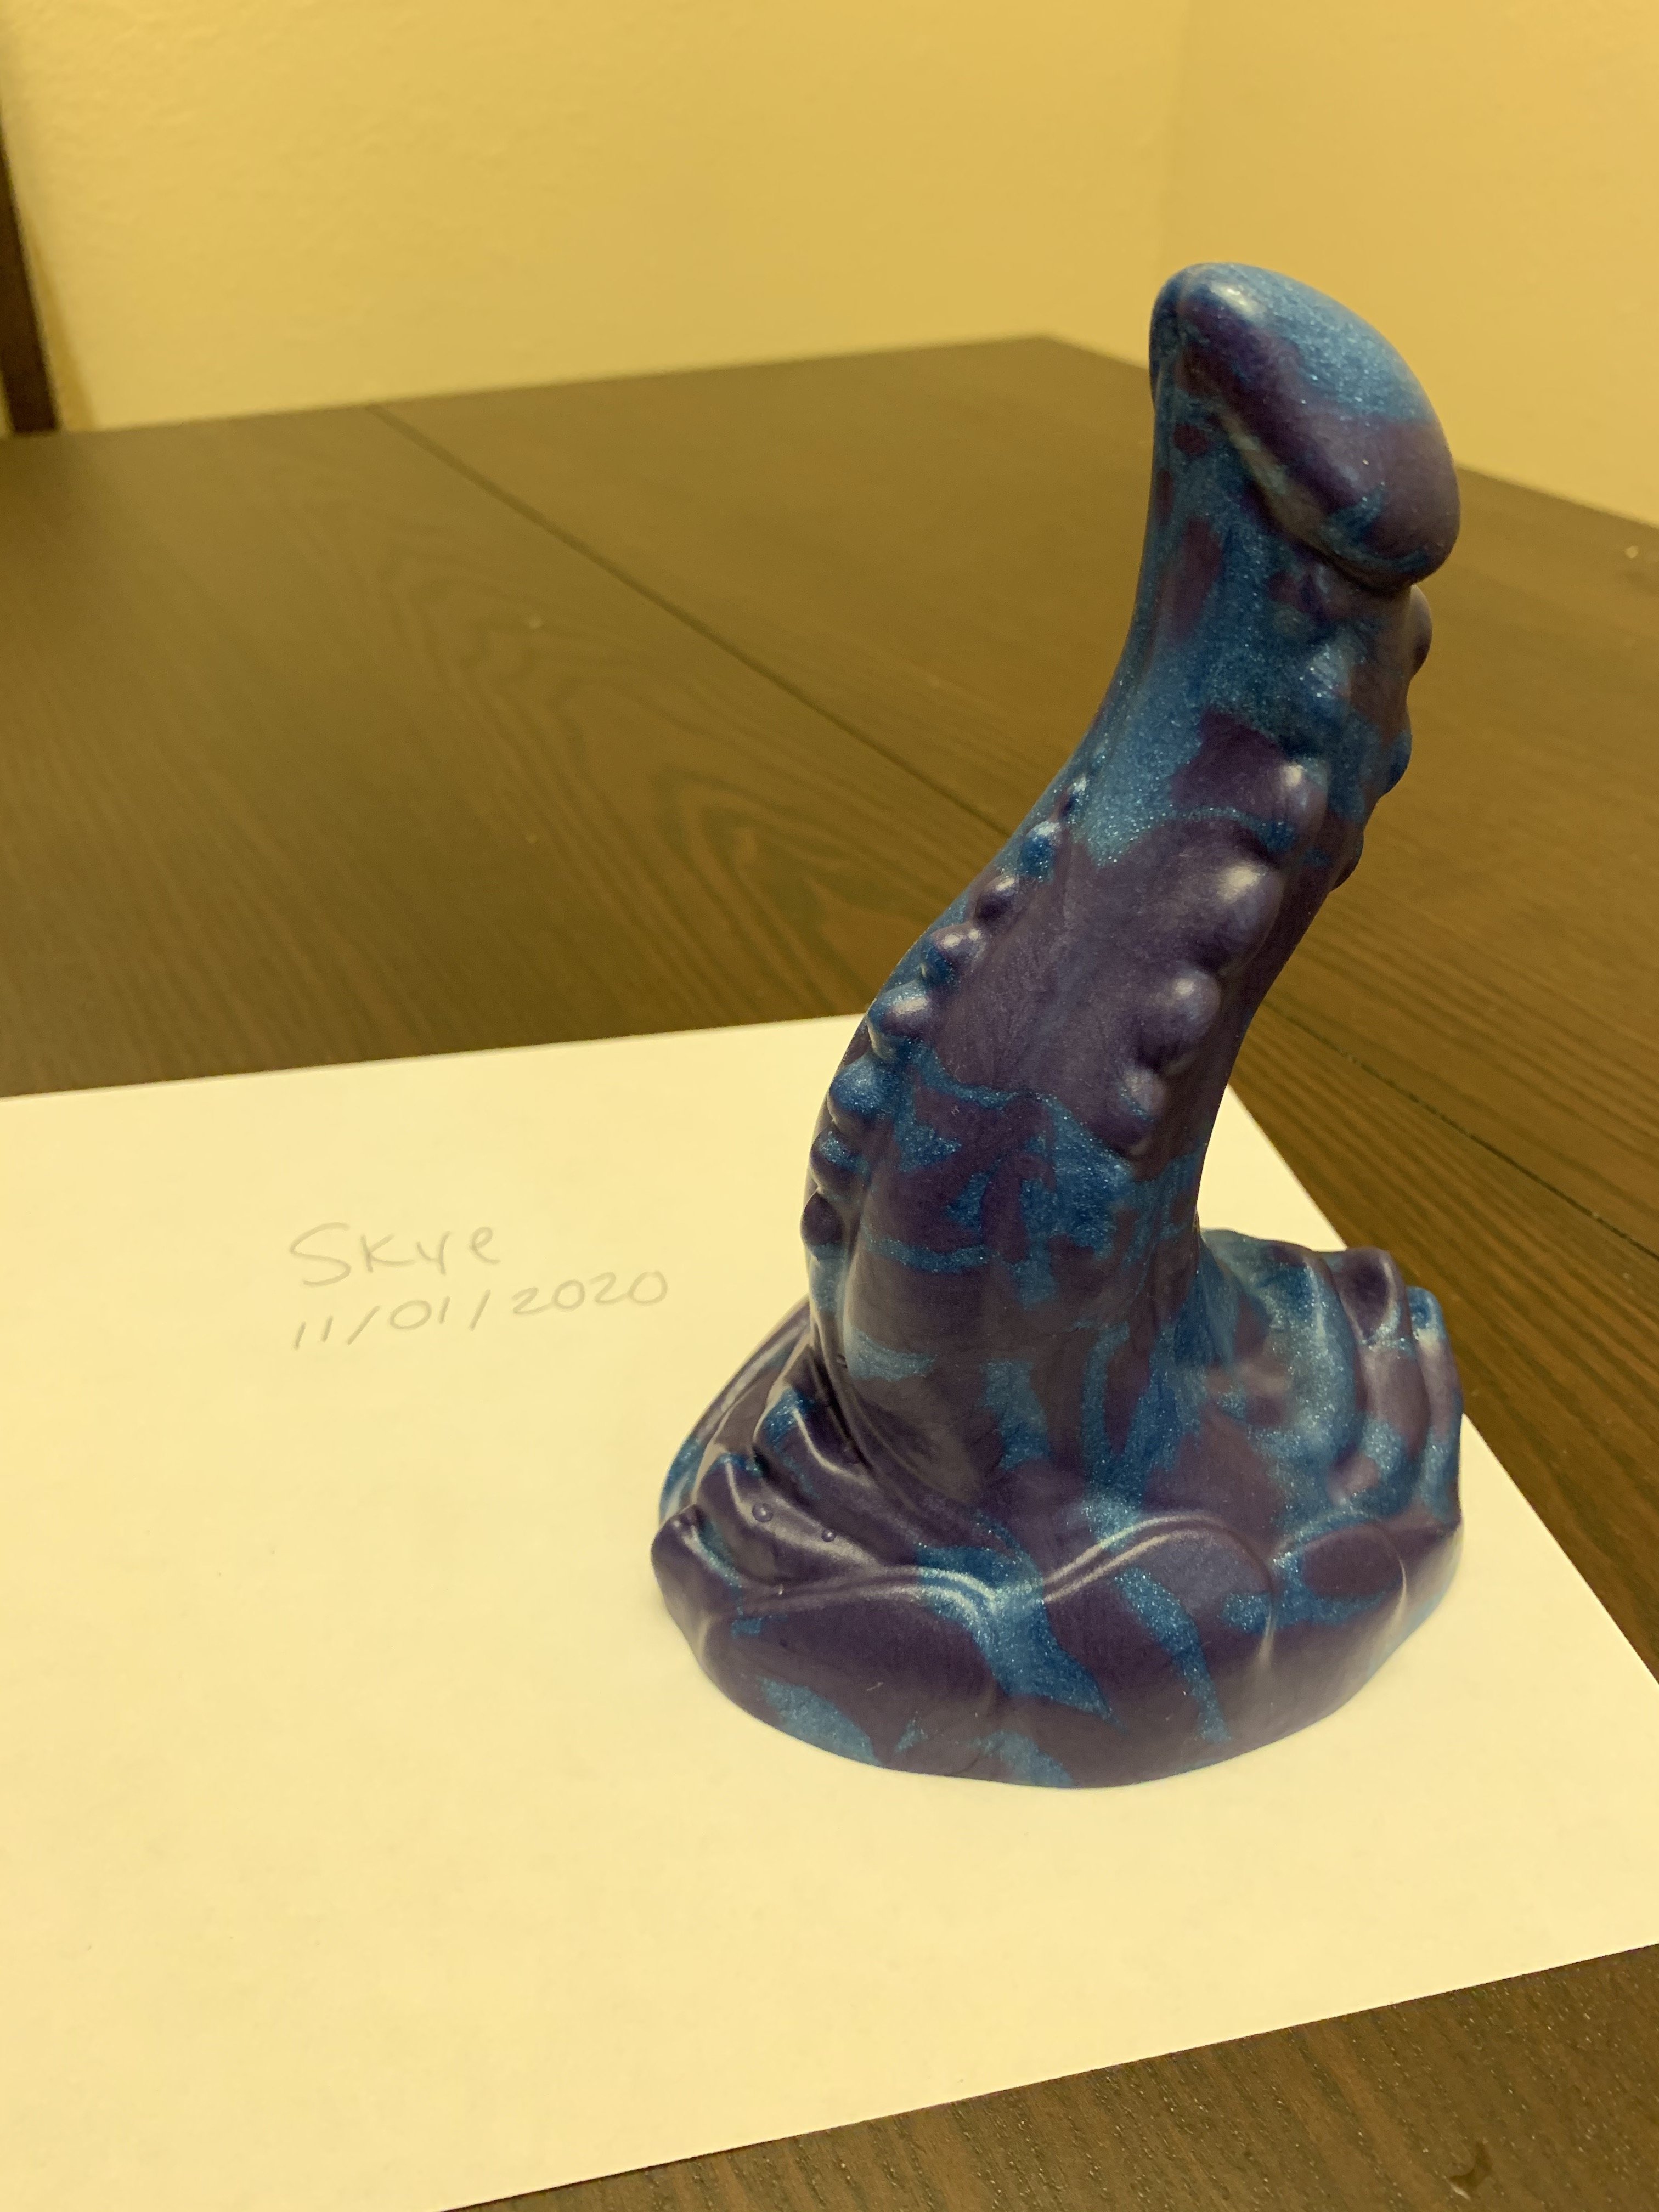 agnes song recommends Bad Dragon Pretzal Review